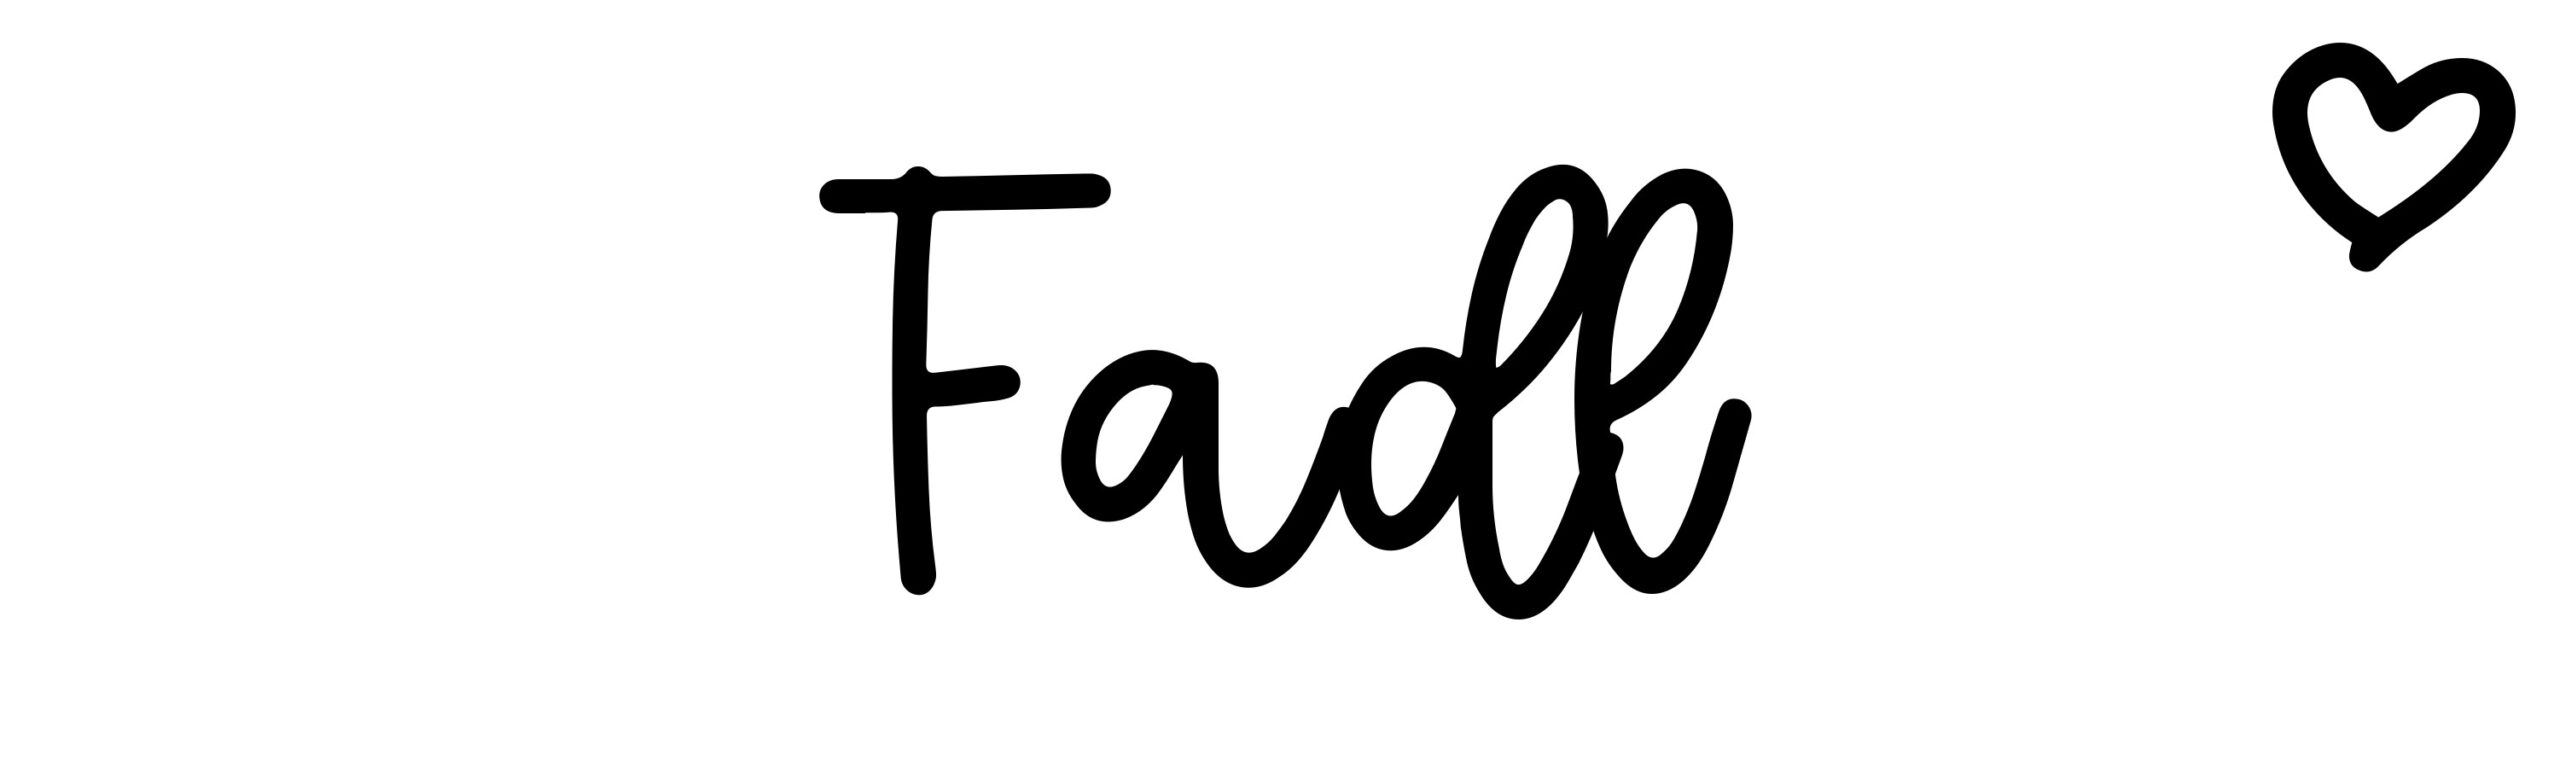 Fadl - Name meaning, origin, variations and more